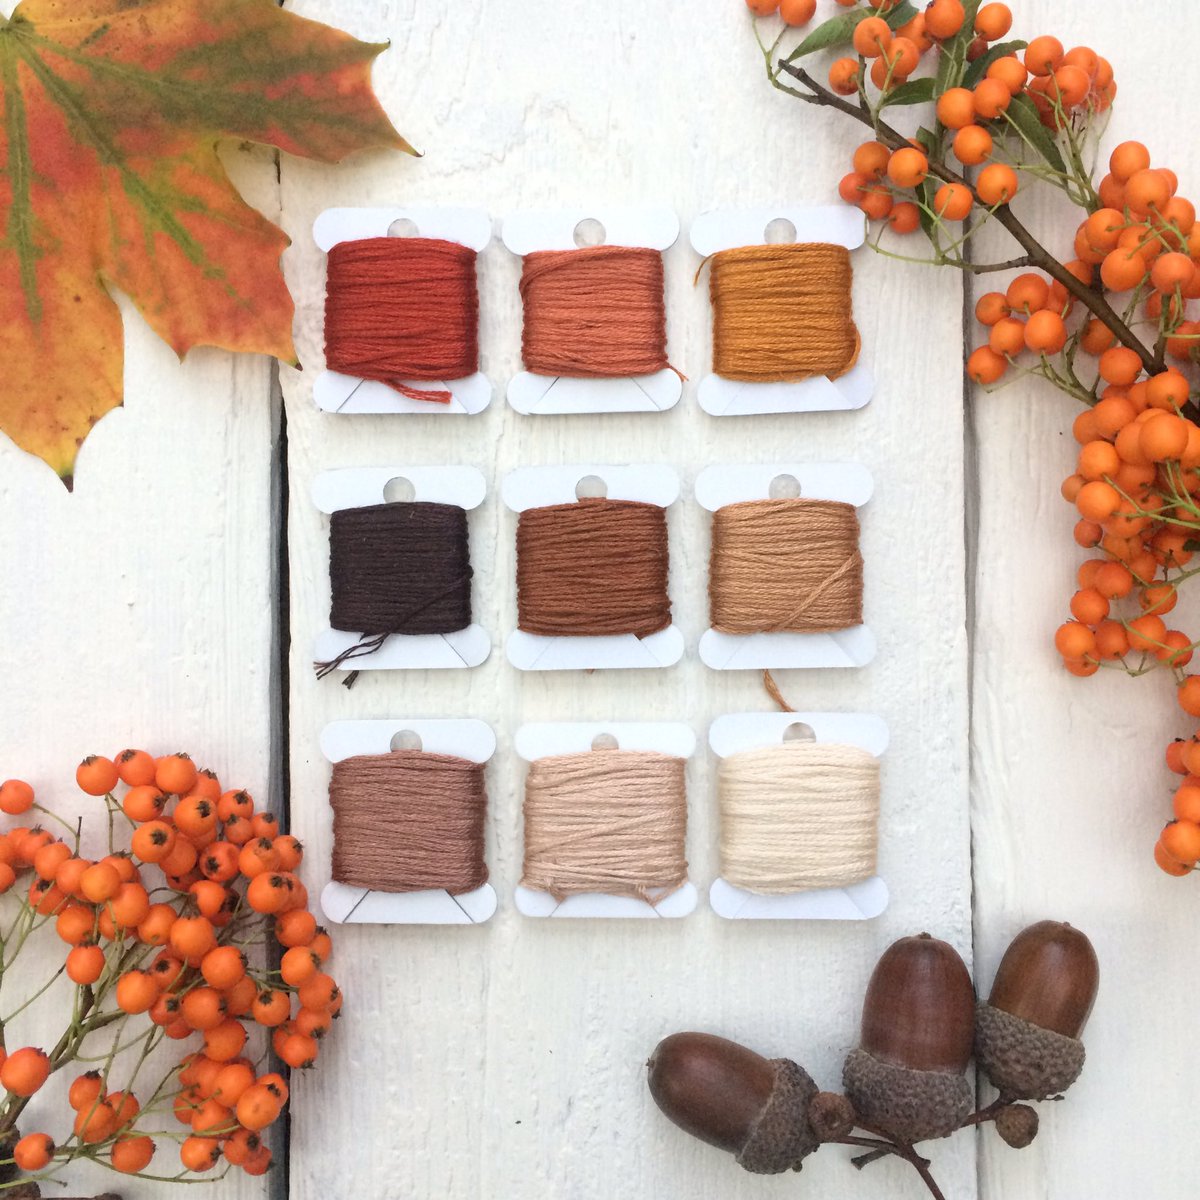 Playing with thread colour palettes for our new Autumn collection 🍂

#hannahburburydesigns #autumn #colour #embroiderythread #handembroidery #threadcolourpalette #mycreativelife #threadcolour #autumncolours #flatlay #autumnvibes🍁 #autumnstyle #loveautumn #newcollection